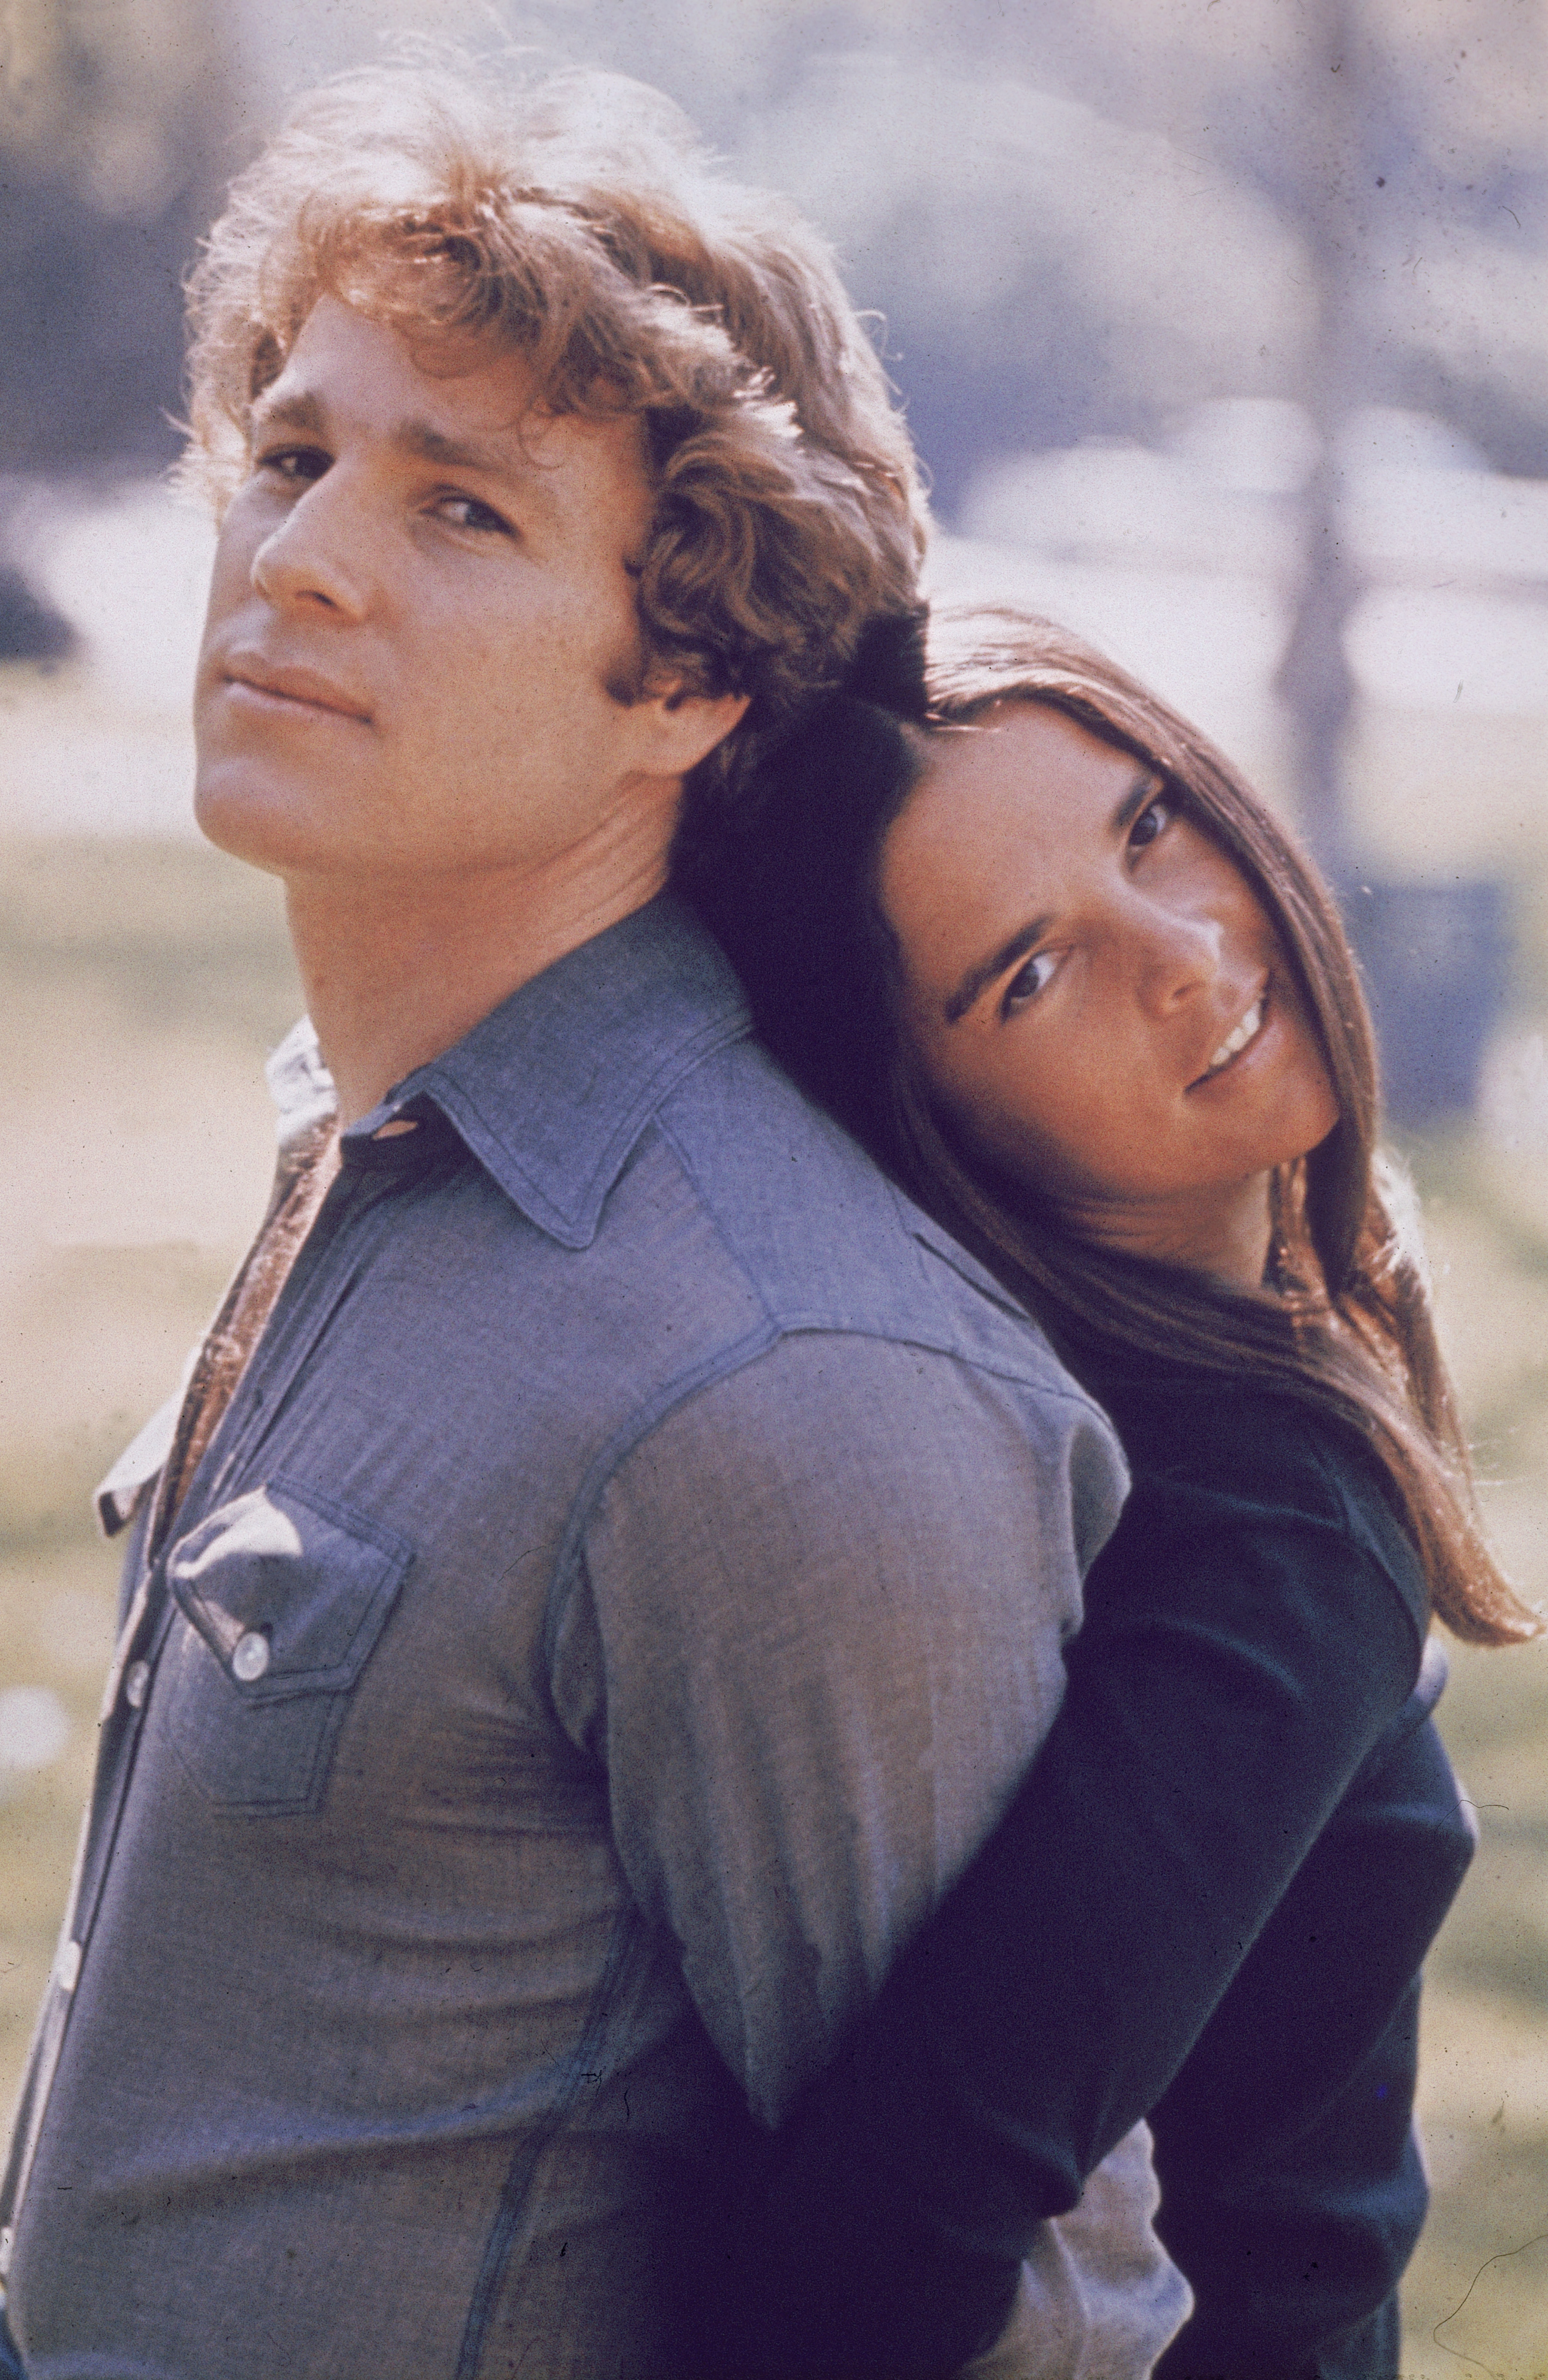 American actors Ryan O'Neal and Ali MacGraw stand back to back outdoors in a still from the 1970 film, "Love Story." | Source: Getty Images